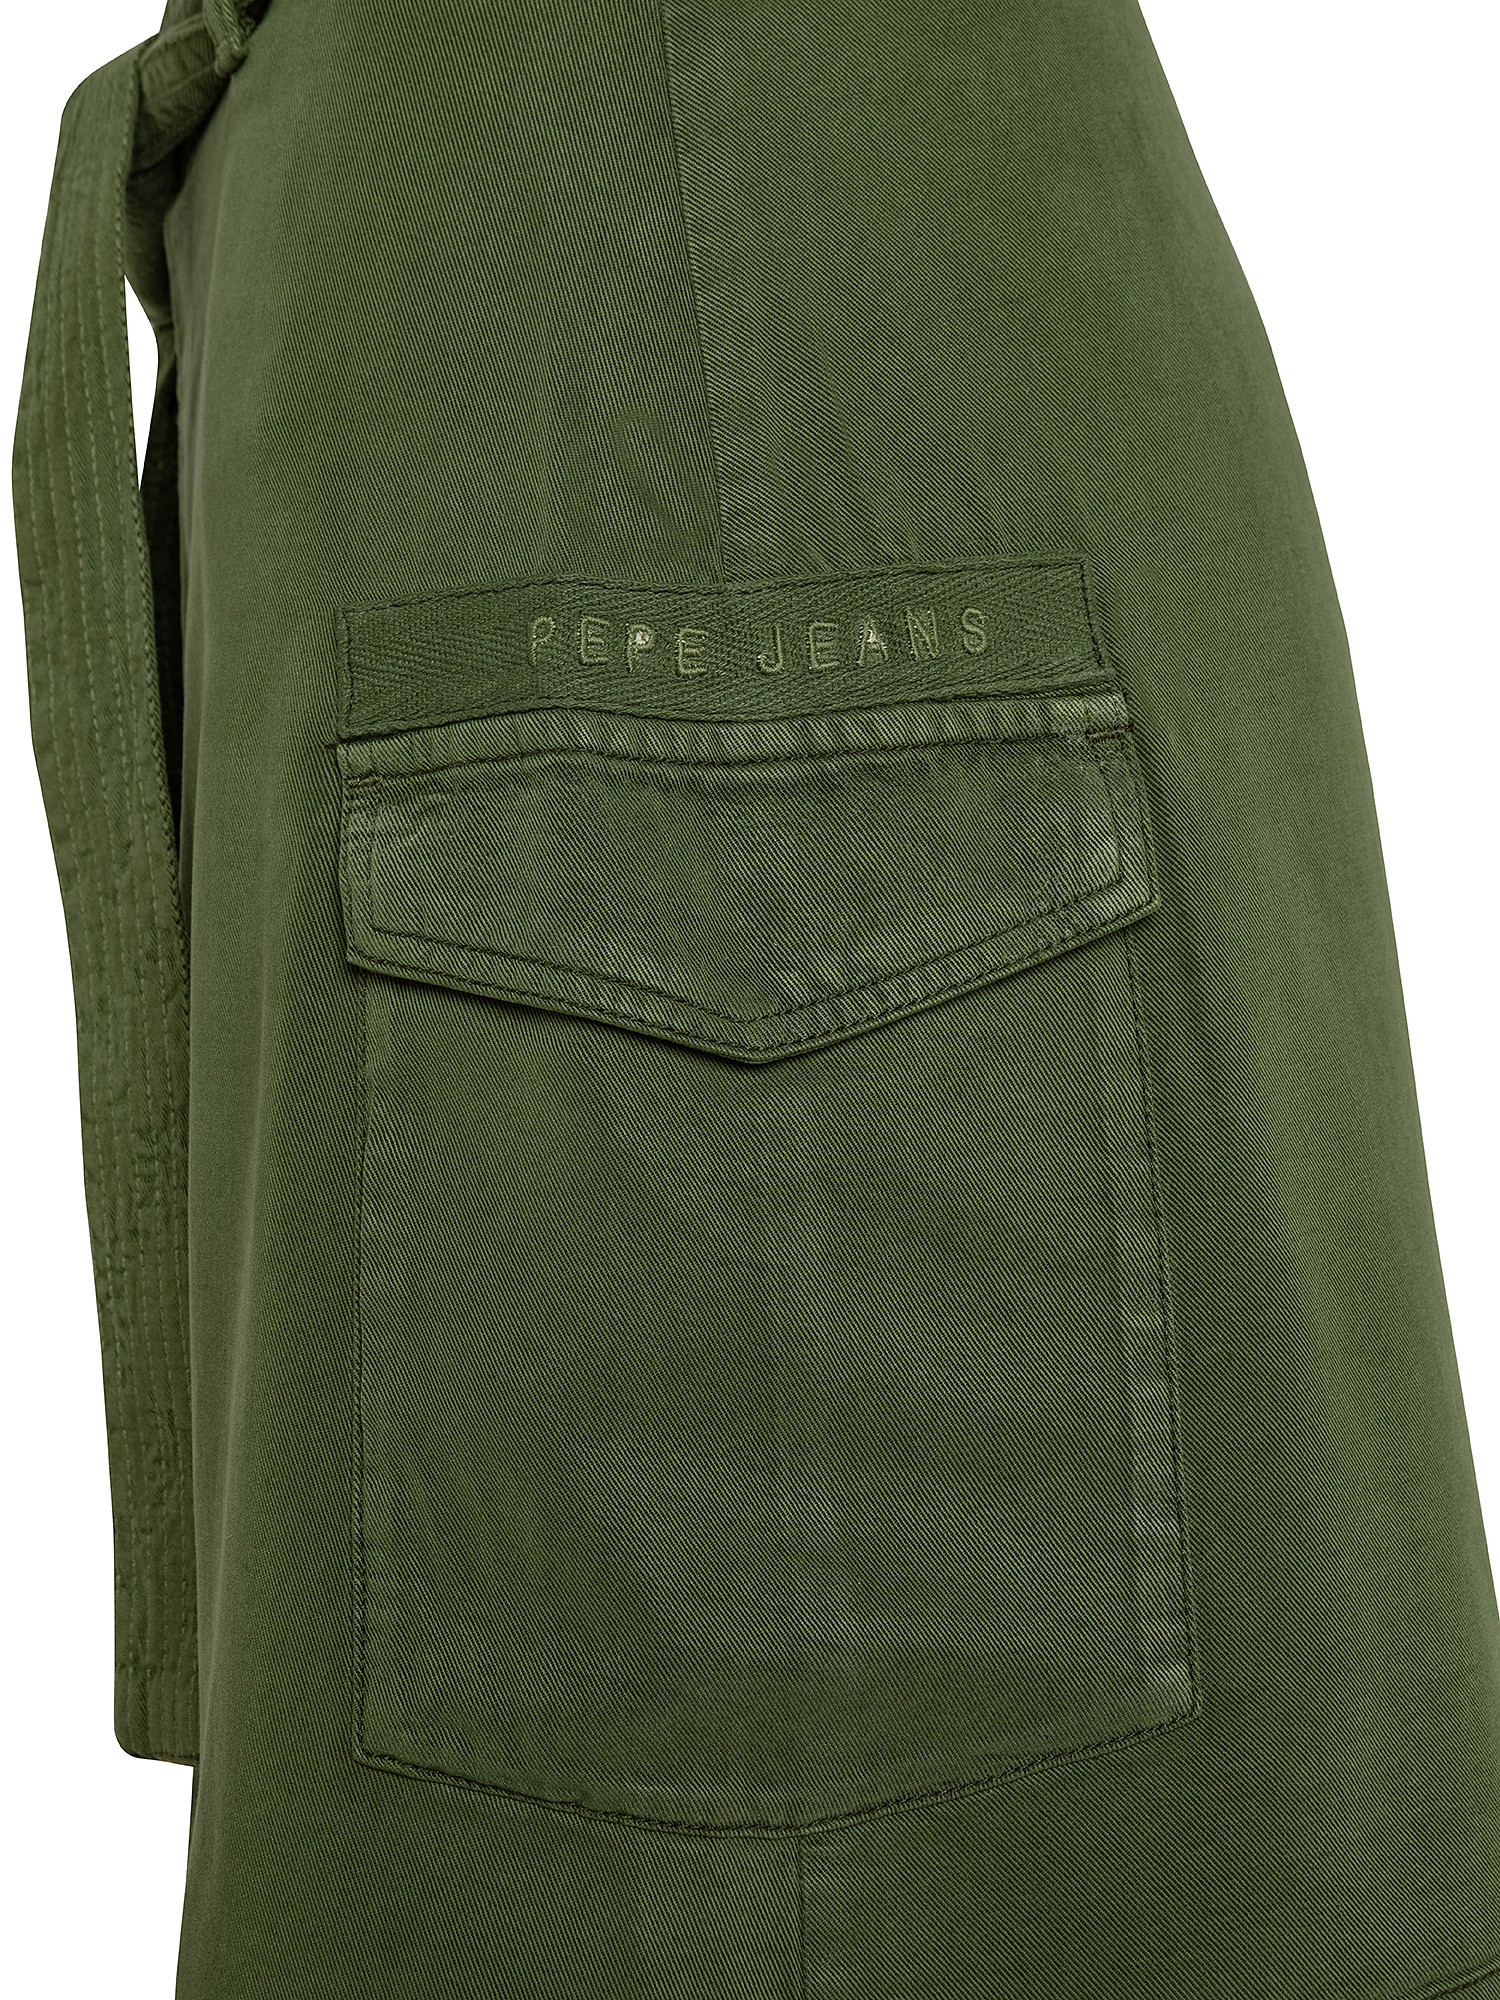 Floren skirt with zip, Green, large image number 2